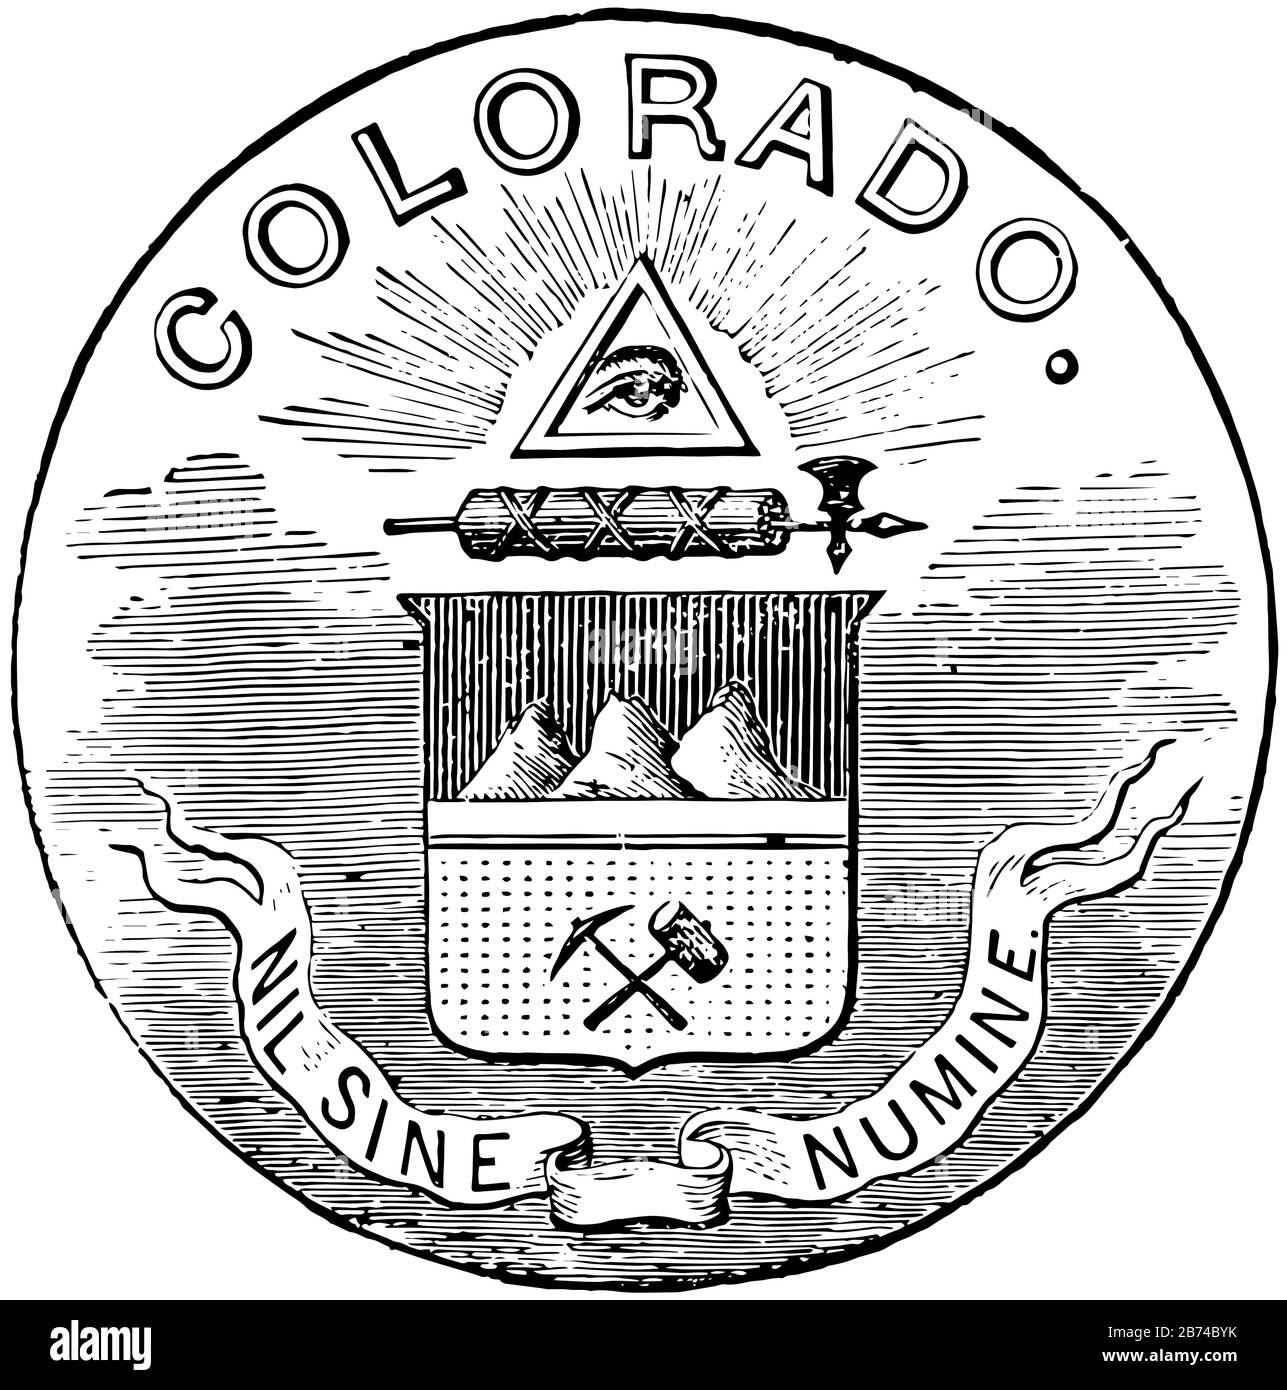 the-official-seal-of-the-us-state-of-colorado-in-1889-this-seal-has-the-eye-of-providence-on-top-within-triangle-below-that-rod-with-a-battle-axe-2B74BYK.jpg